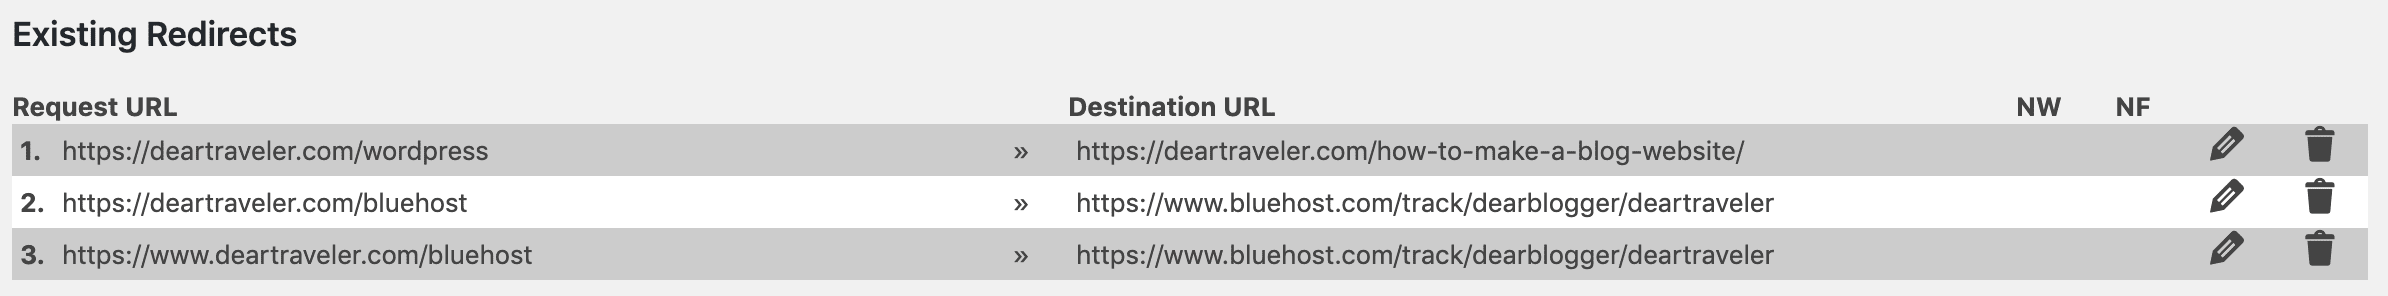 existing link redirects wordpress